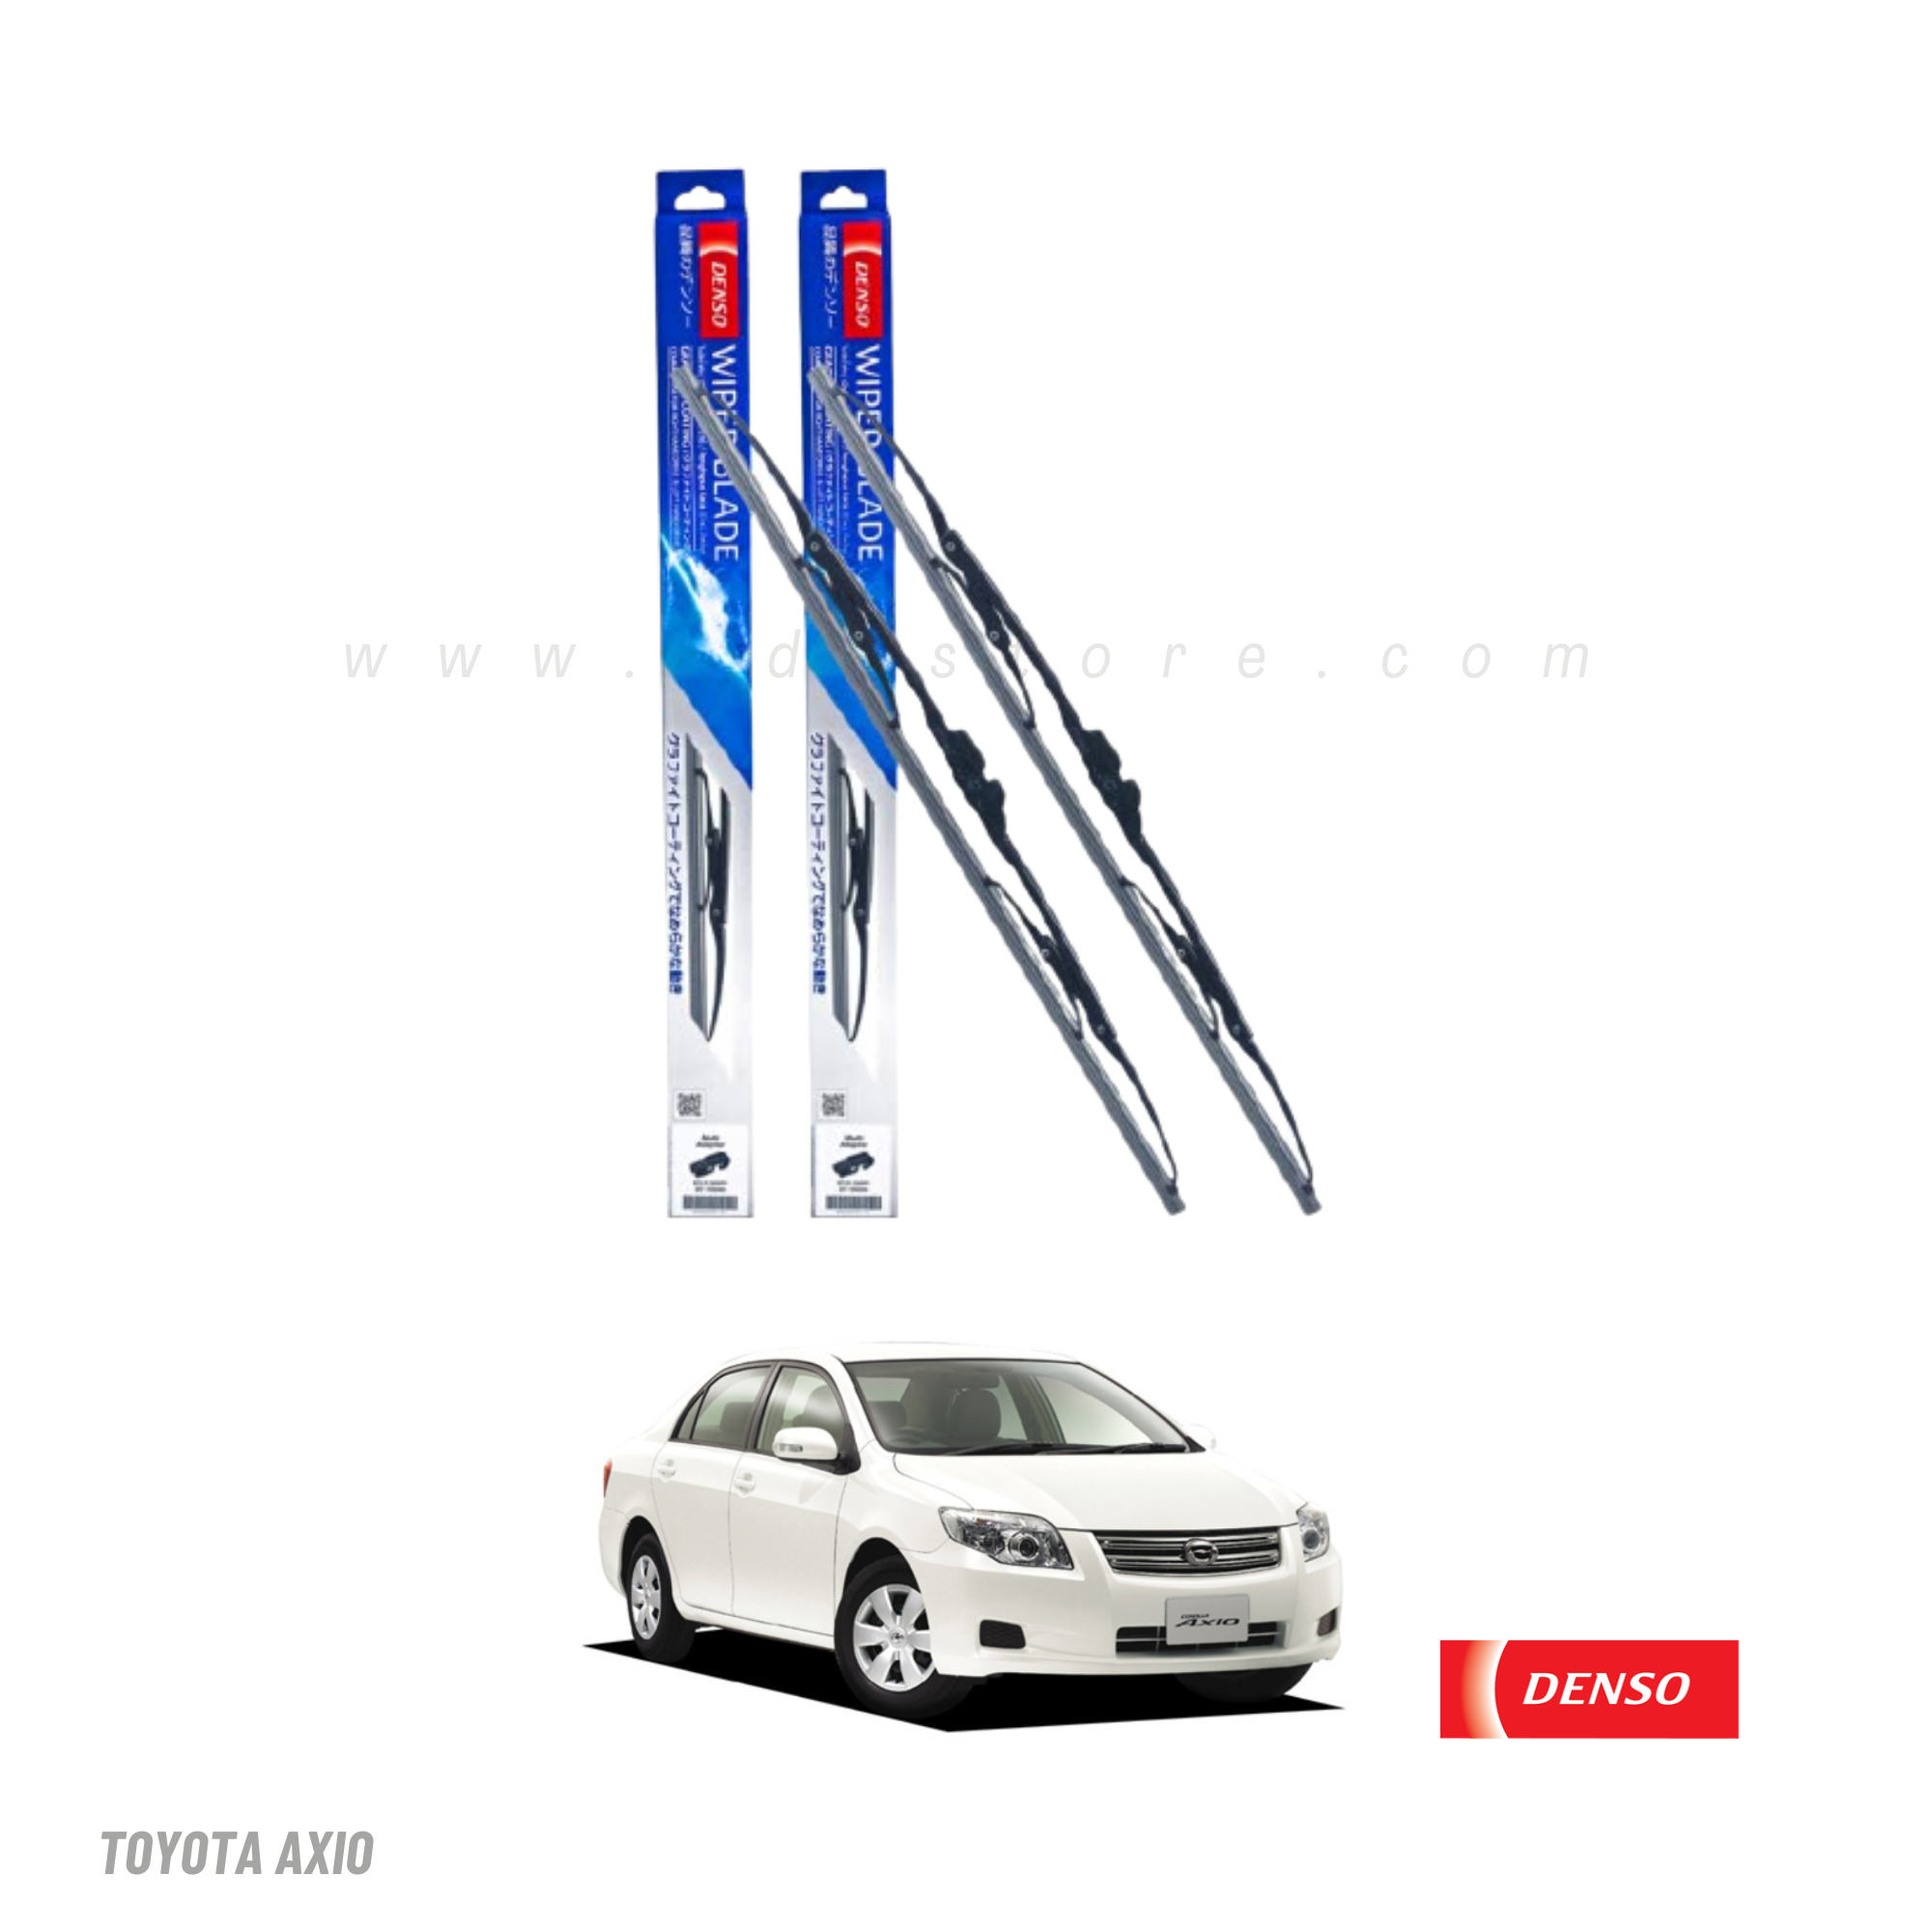 WIPER BLADE DENSO STANDARD TYPE FOR TOYOTA AXIO